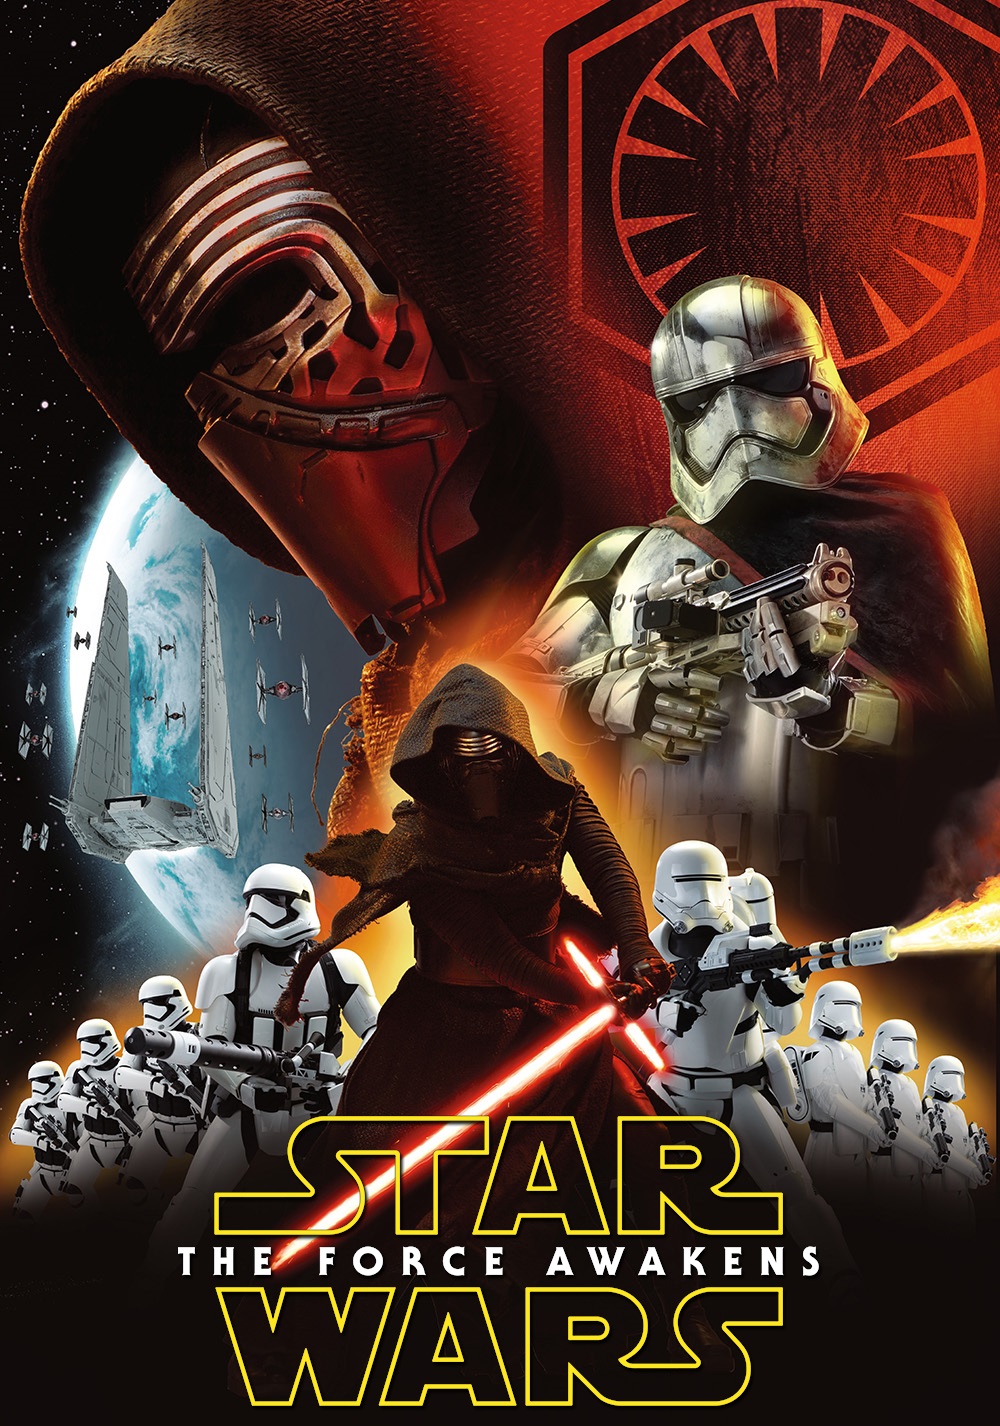 Star Wars Ep. VII: The Force Awakens download the new version for ipod